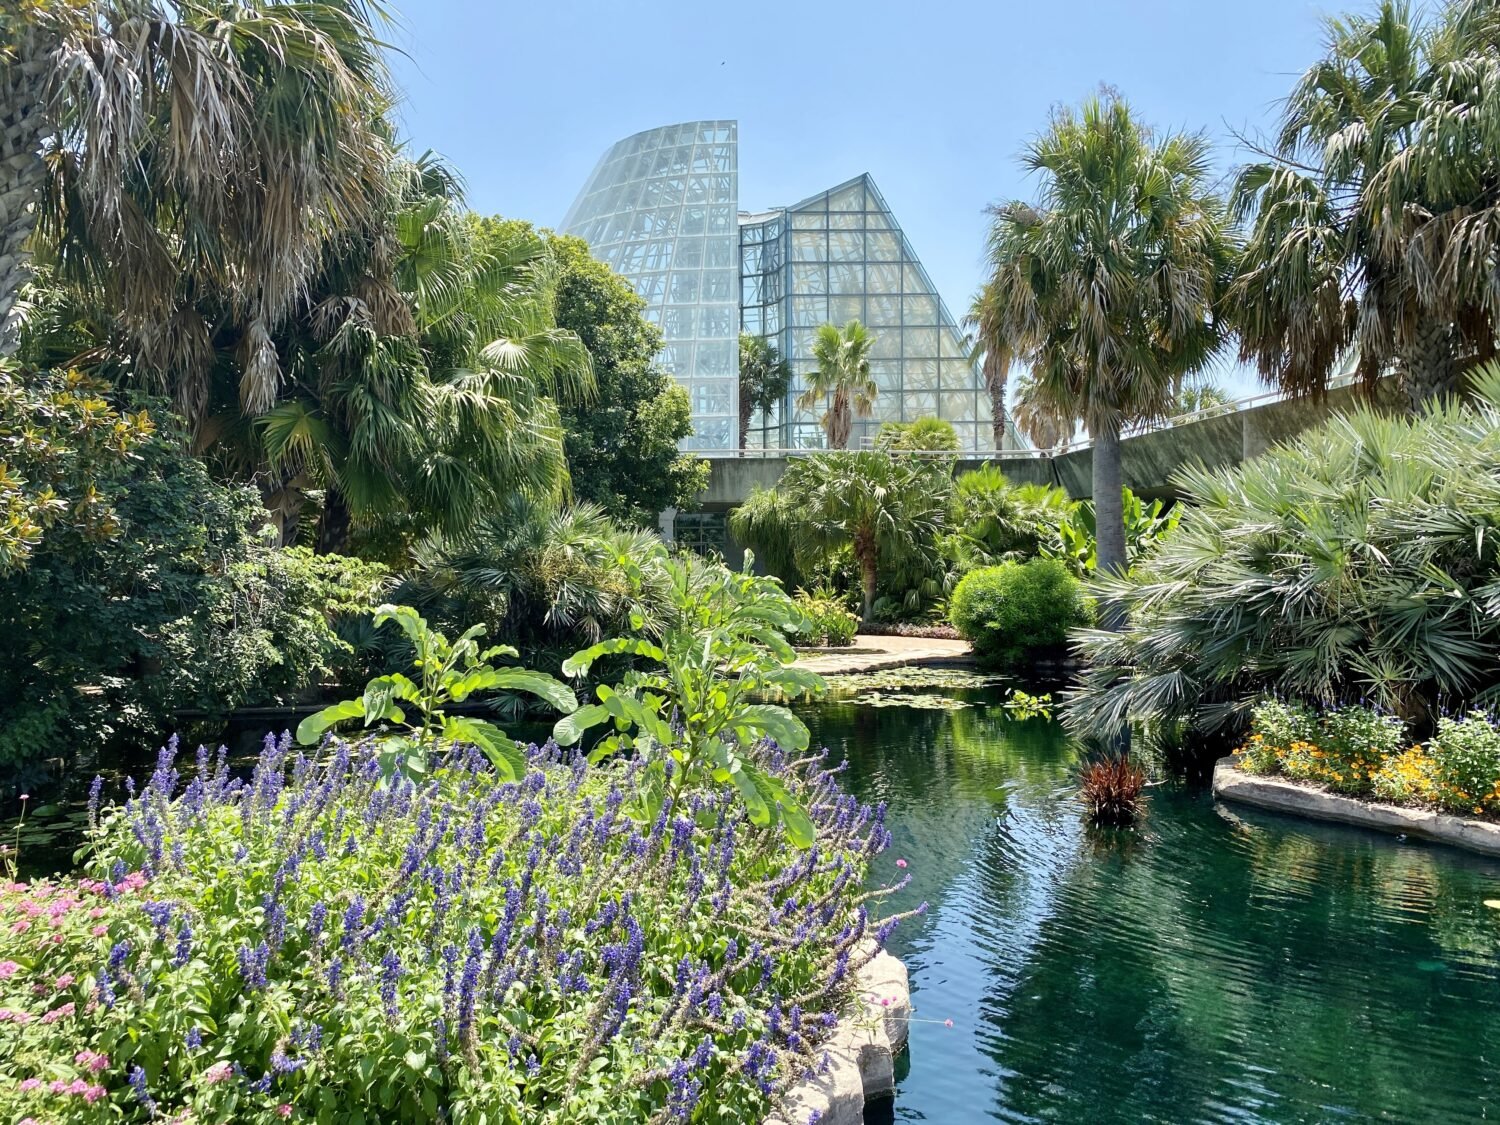 flowers and a pond in front of a glass conservatory with palm trees